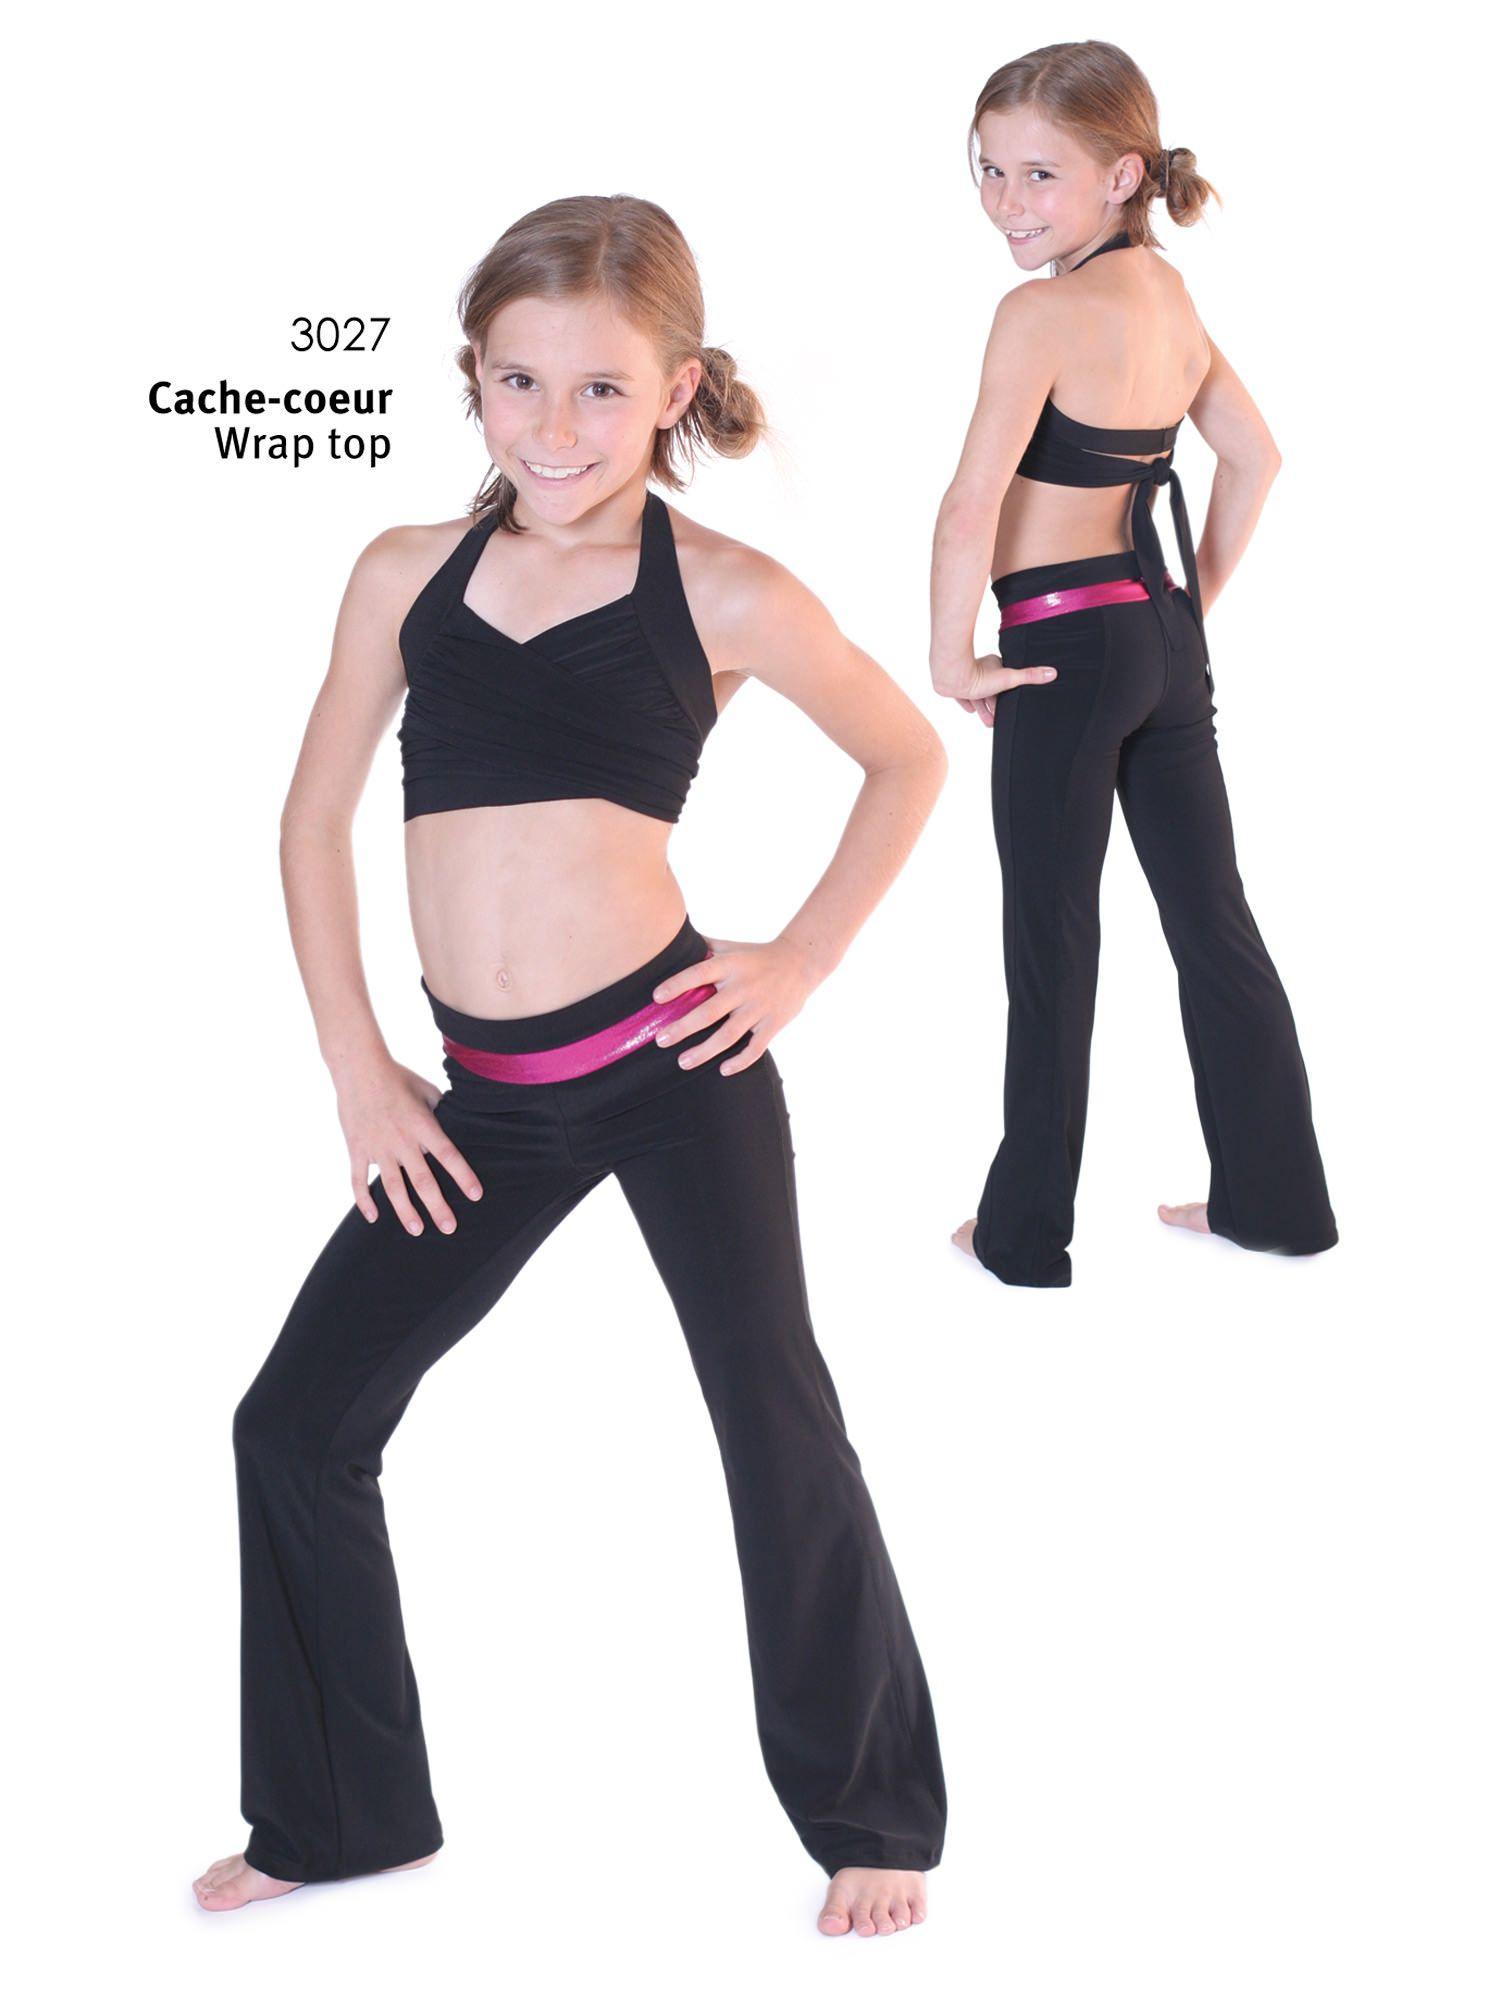 Yoga pants pattern for girls - Shown with 3027 wrap top